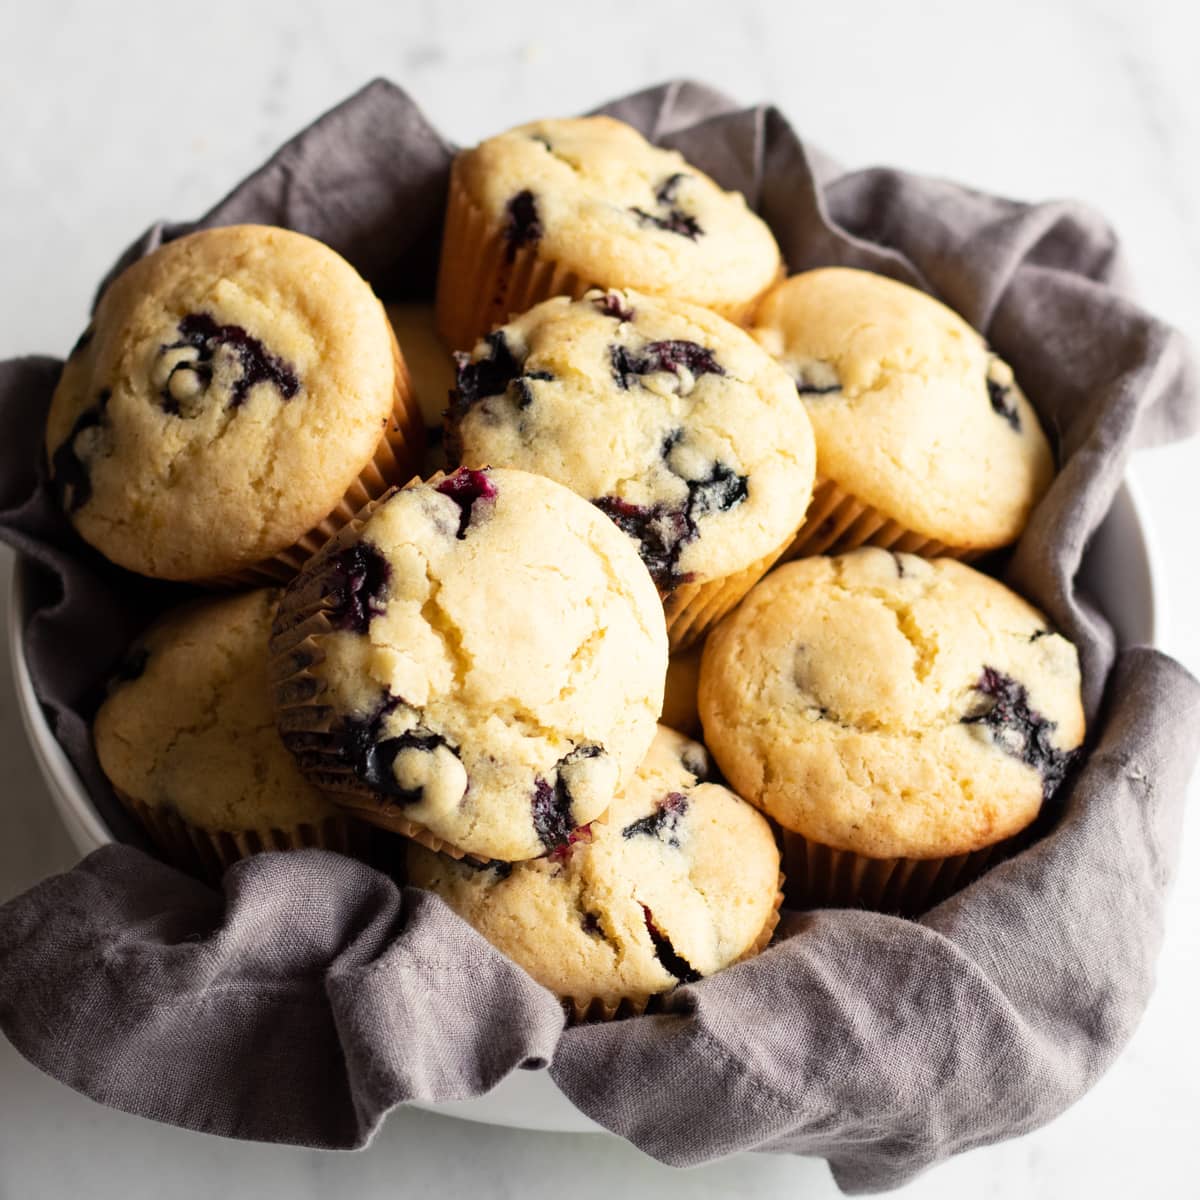 gluten-free blueberry muffins in a bowl lined with a cloth napkin